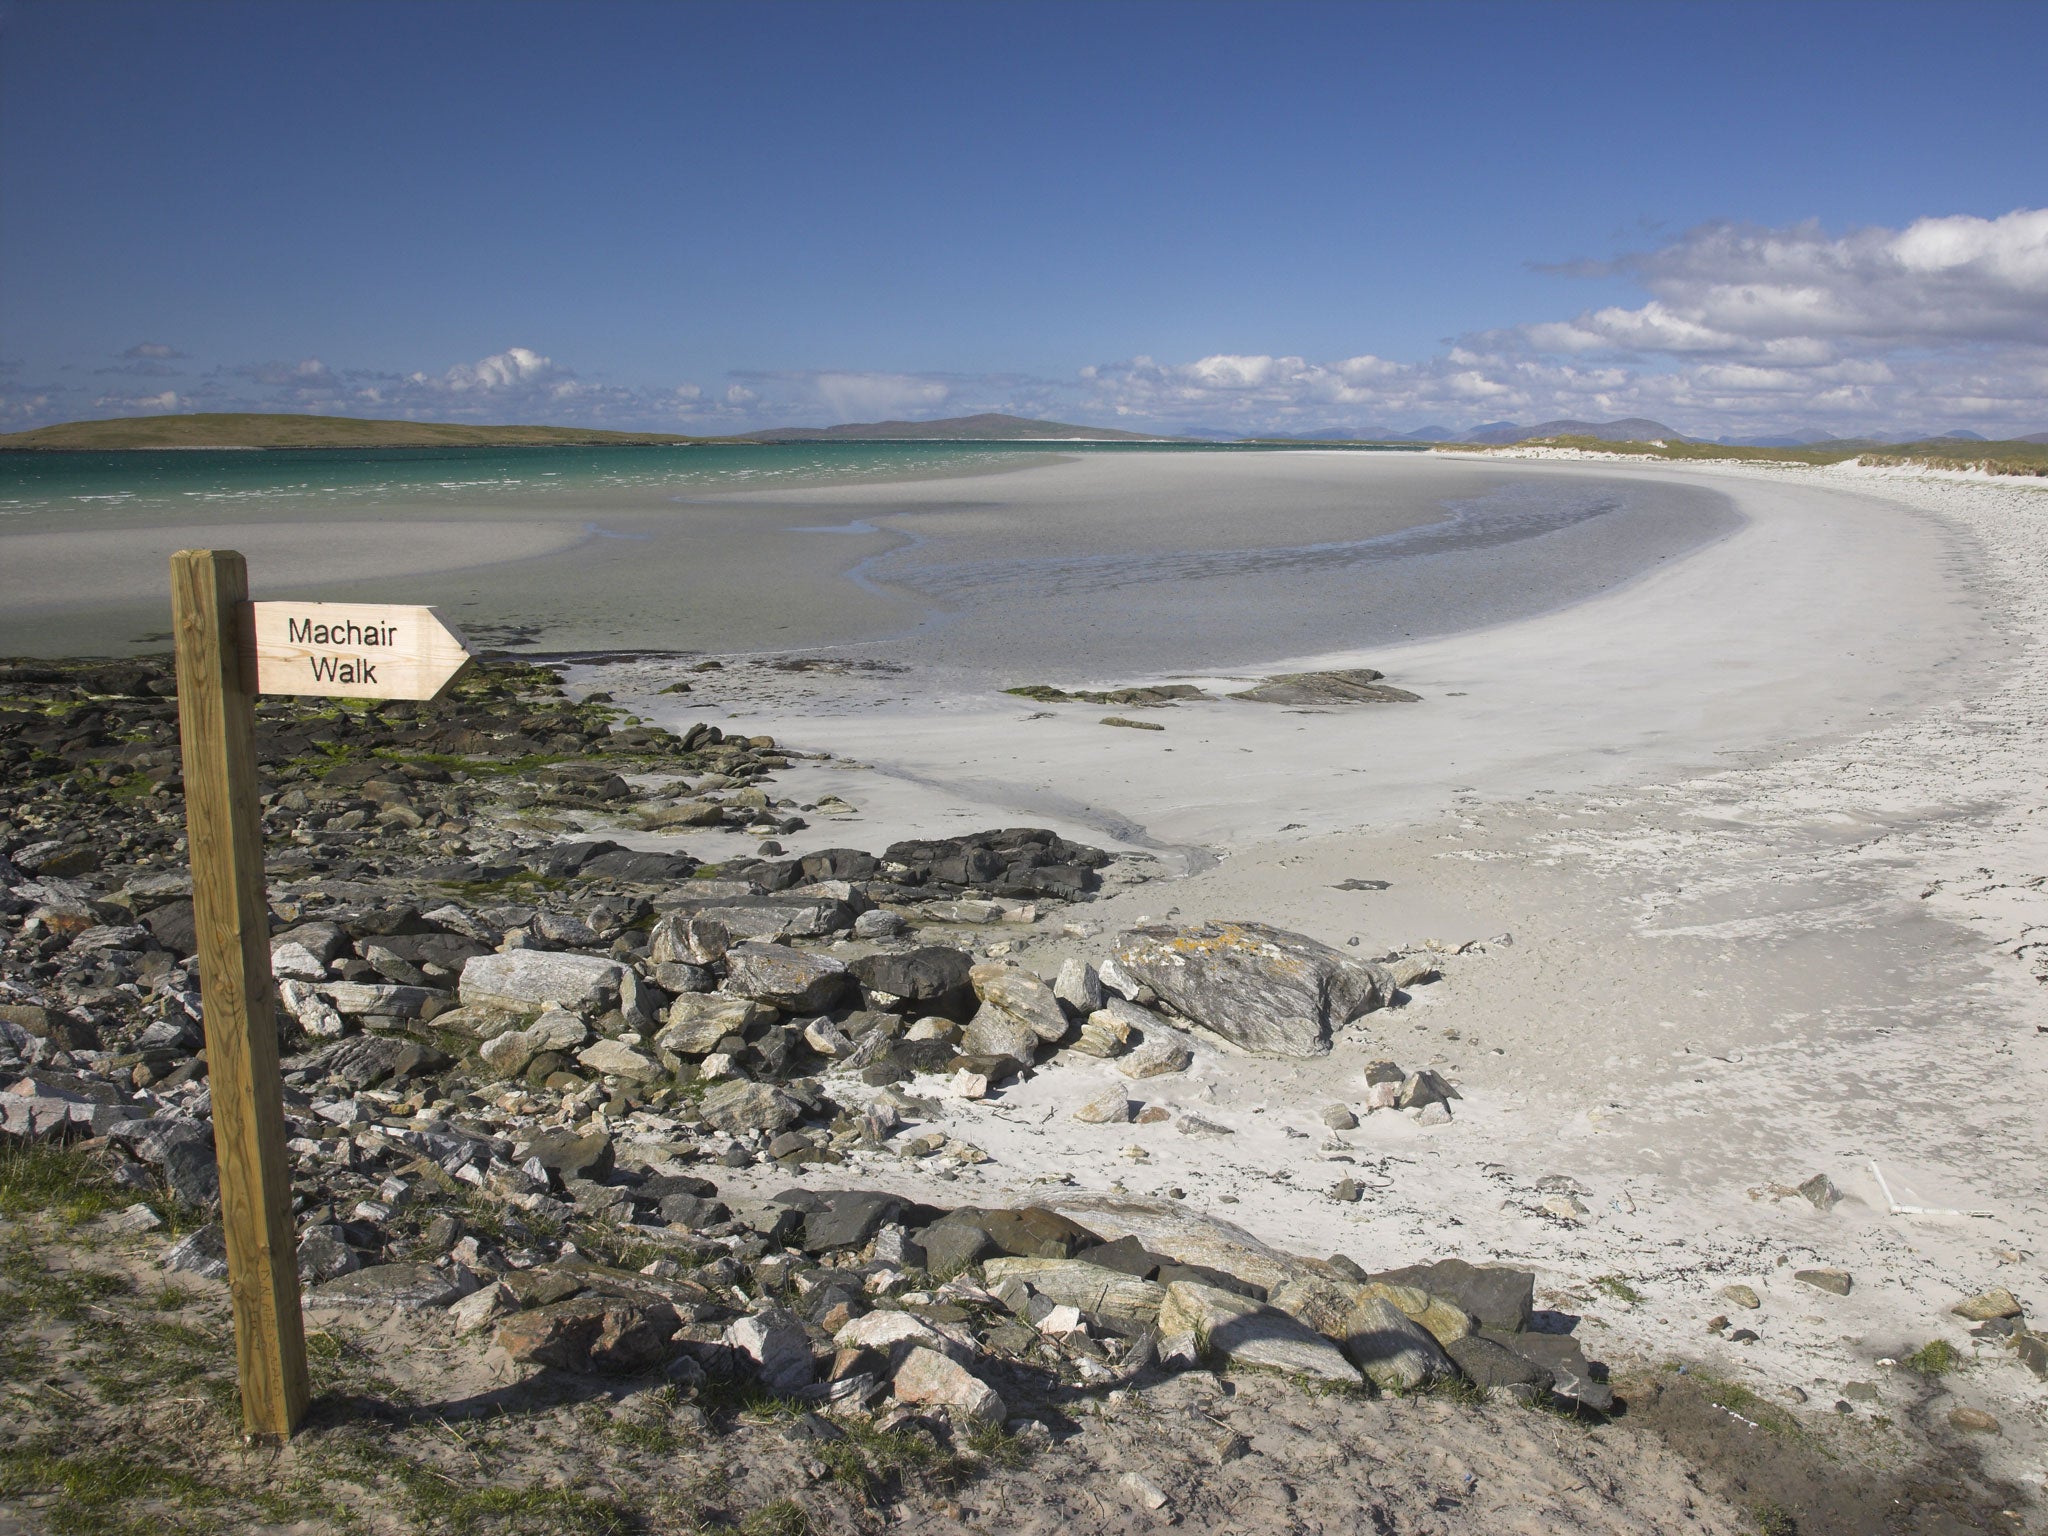 Machair, a grassy coastal habitat found only in north-west Scotland and the west coast of Ireland, is one of the several elements of the UK’s “cultural heritage” that is at risk from climate change